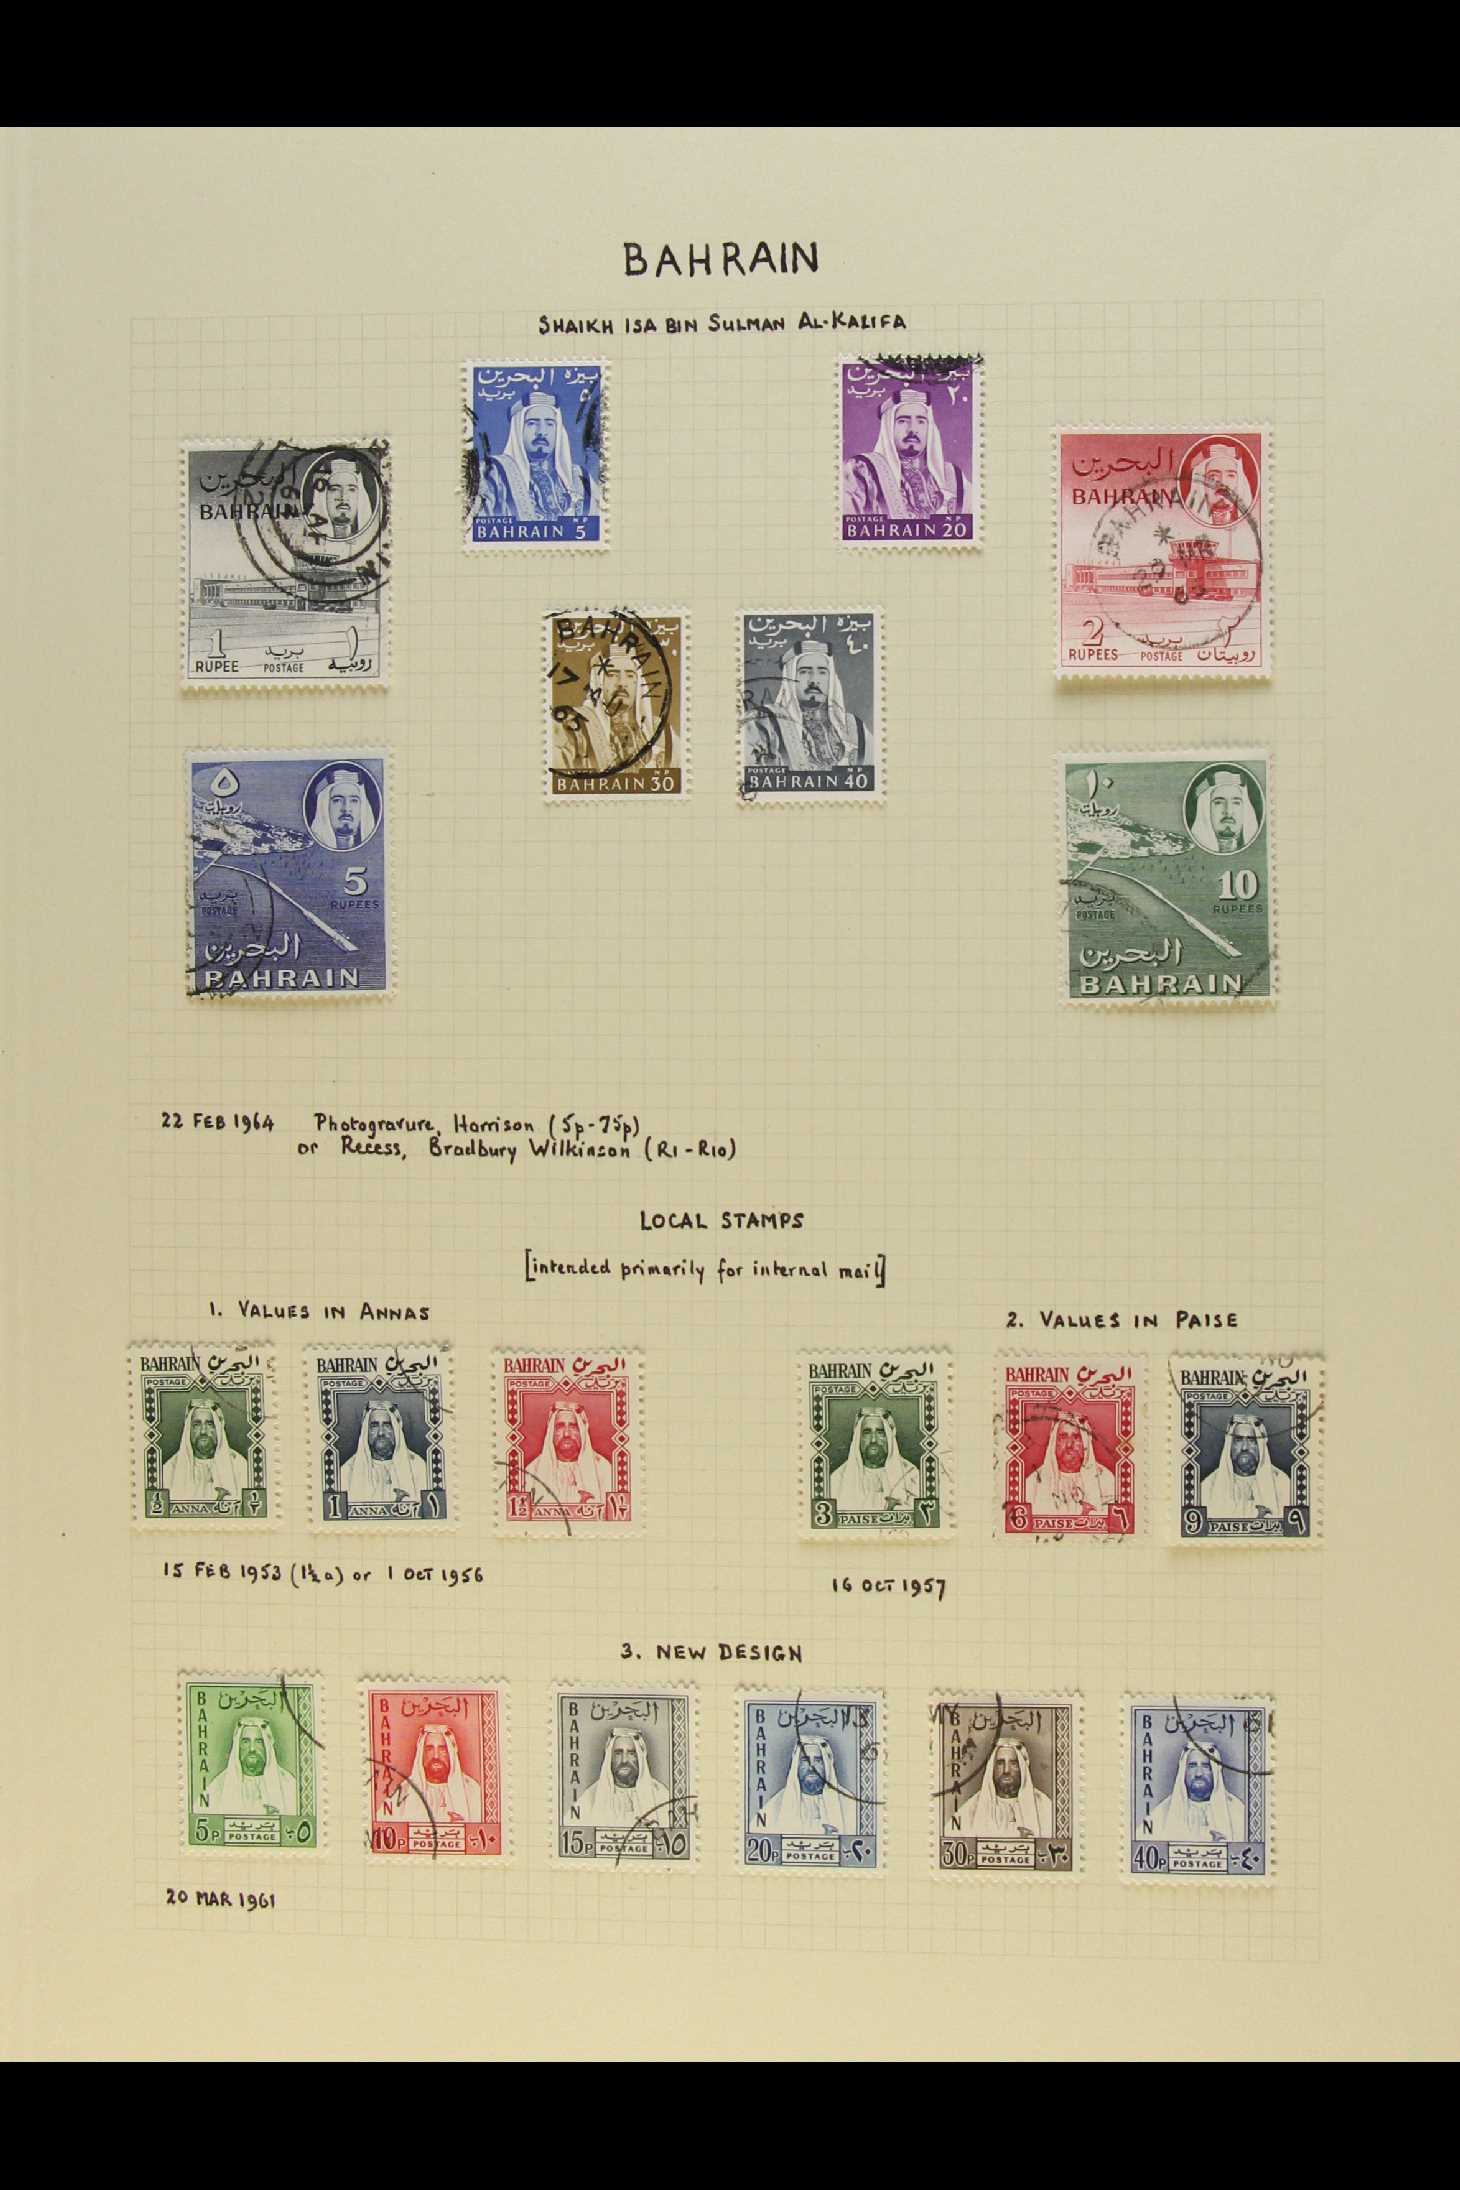 BAHRAIN 1950 - 1964 FINE USED COLLECTION on album pages includes a complete run of QEII issues (SG - Image 4 of 4